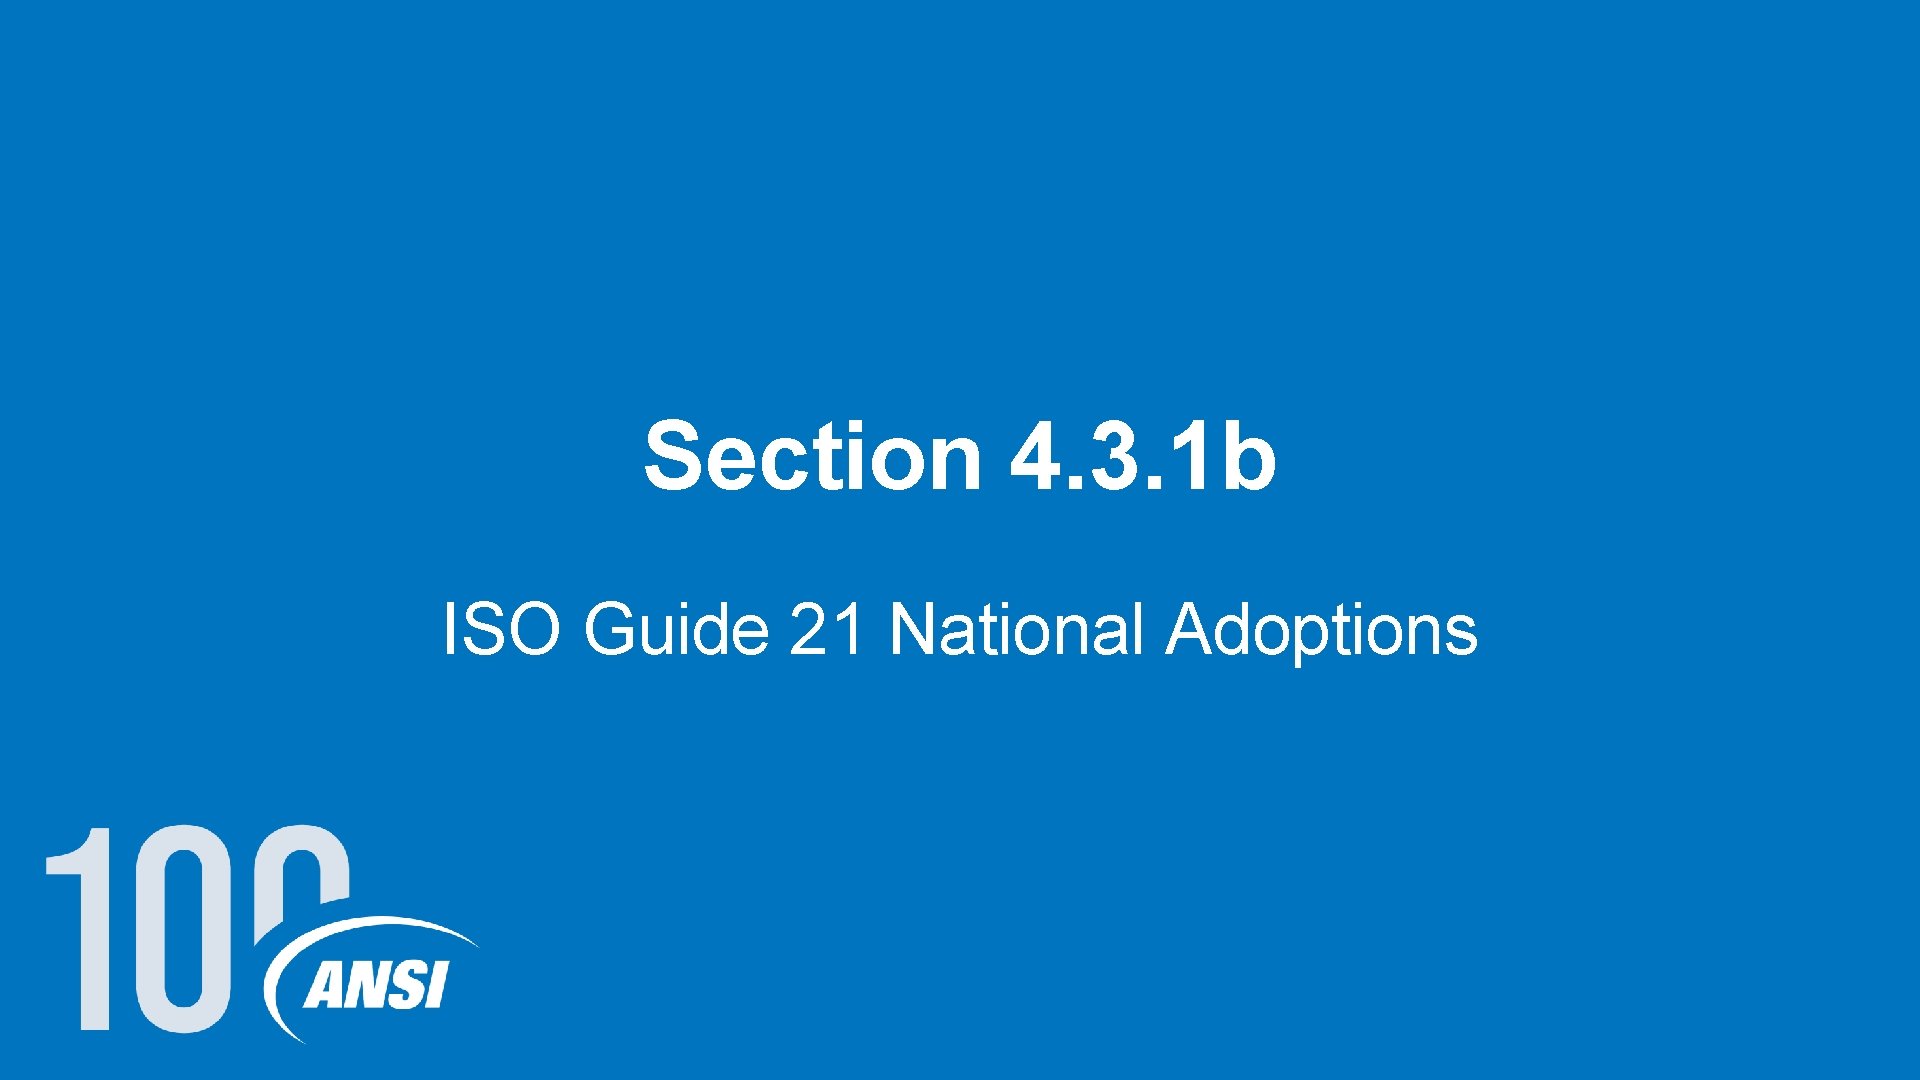 Section 4. 3. 1 b ISO Guide 21 National Adoptions 